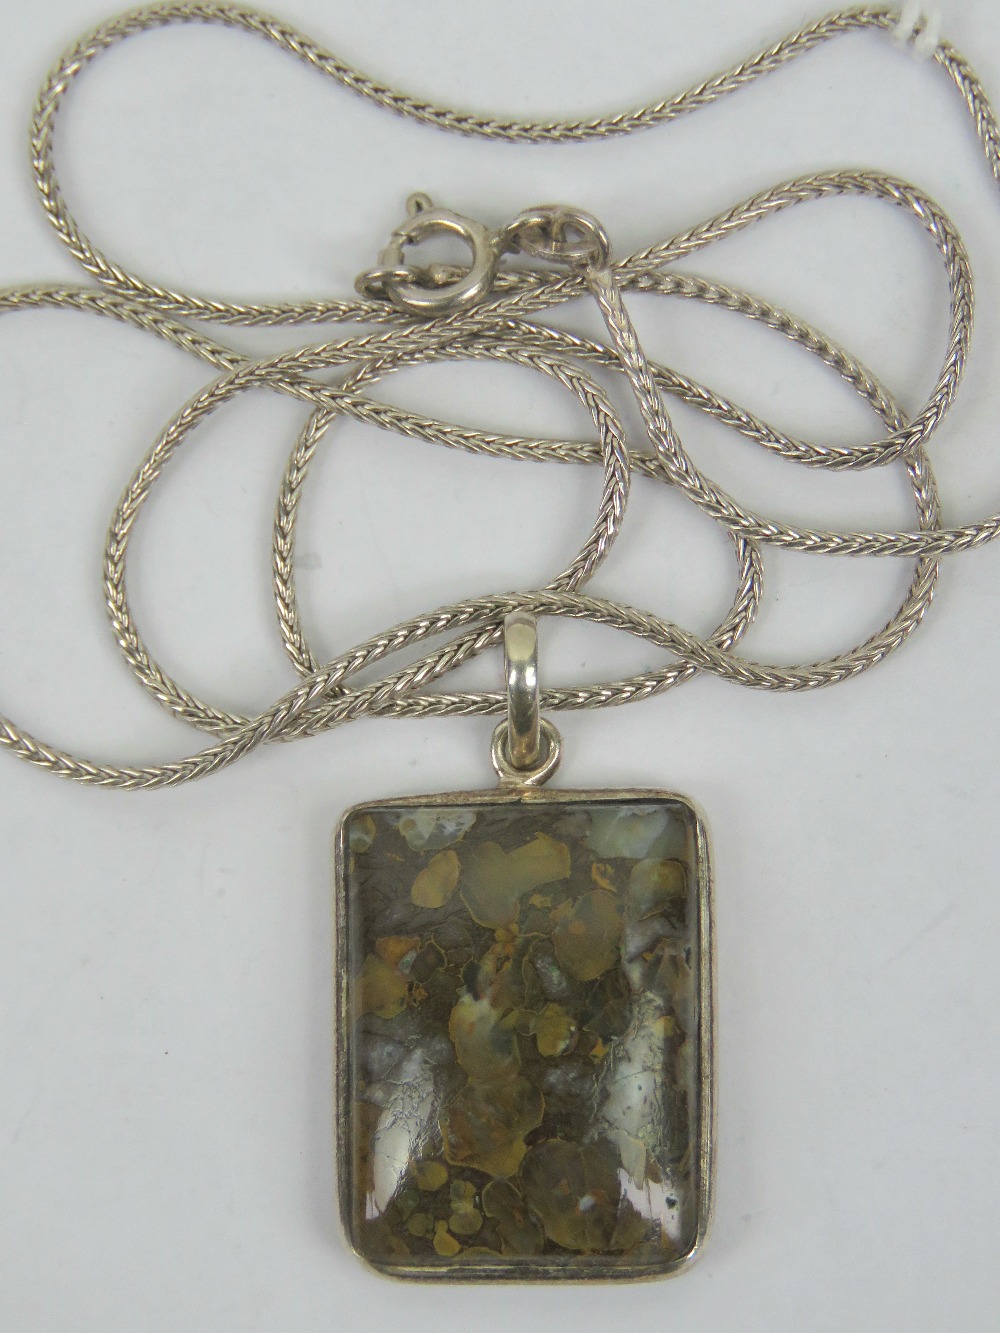 A silver and agate rectangular pendant measuring 3cm including bale,